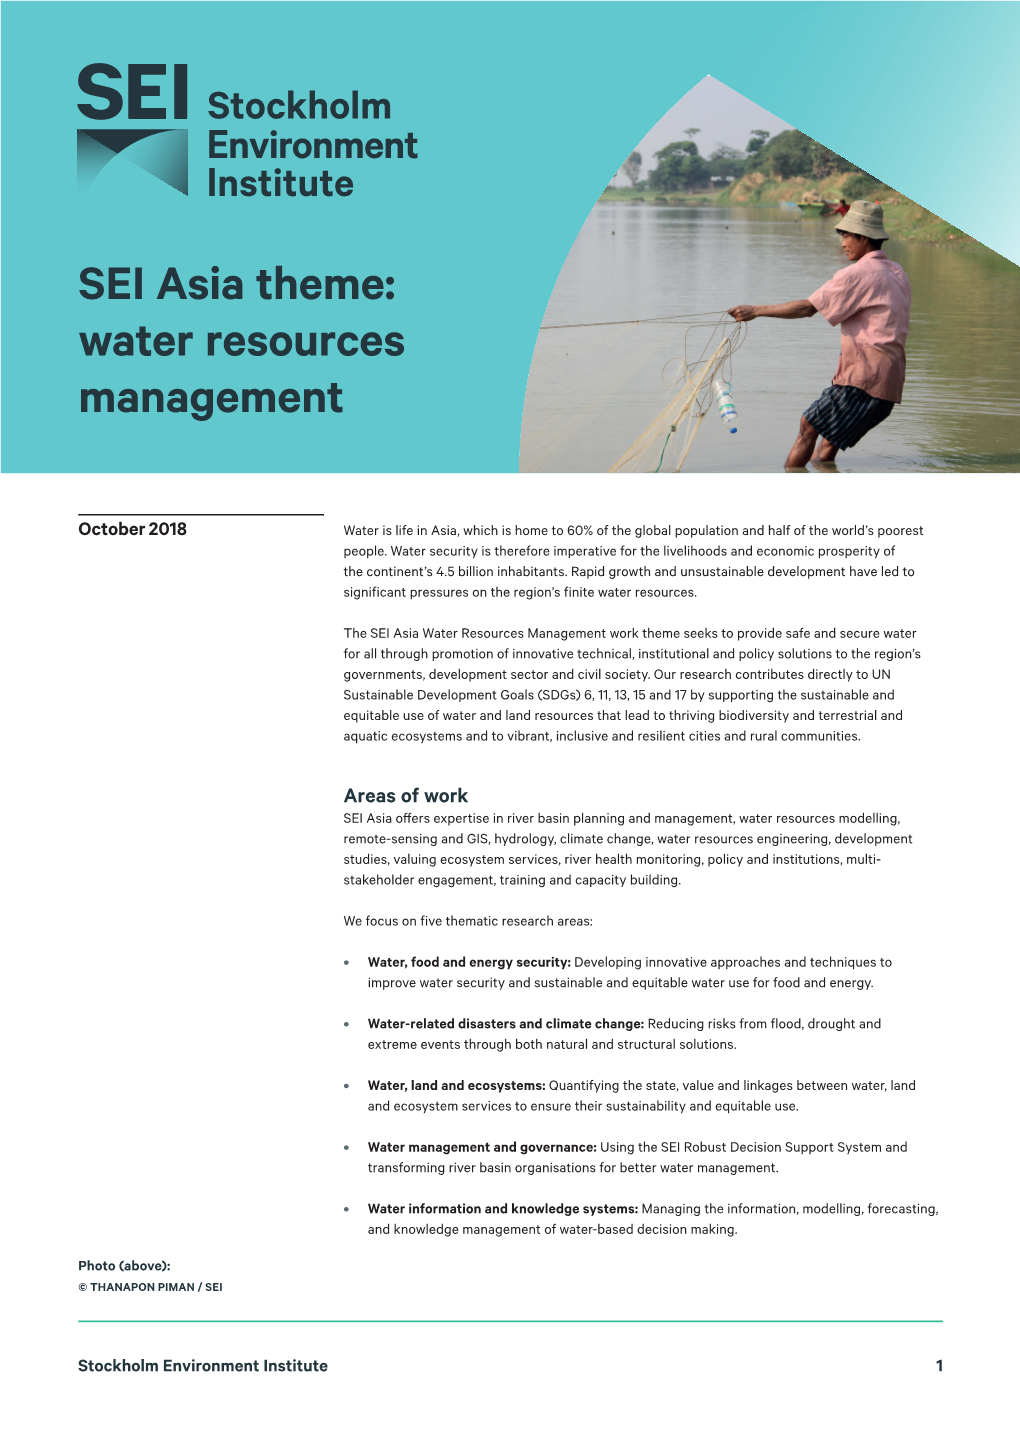 SEI Asia Theme: Water Resources Management